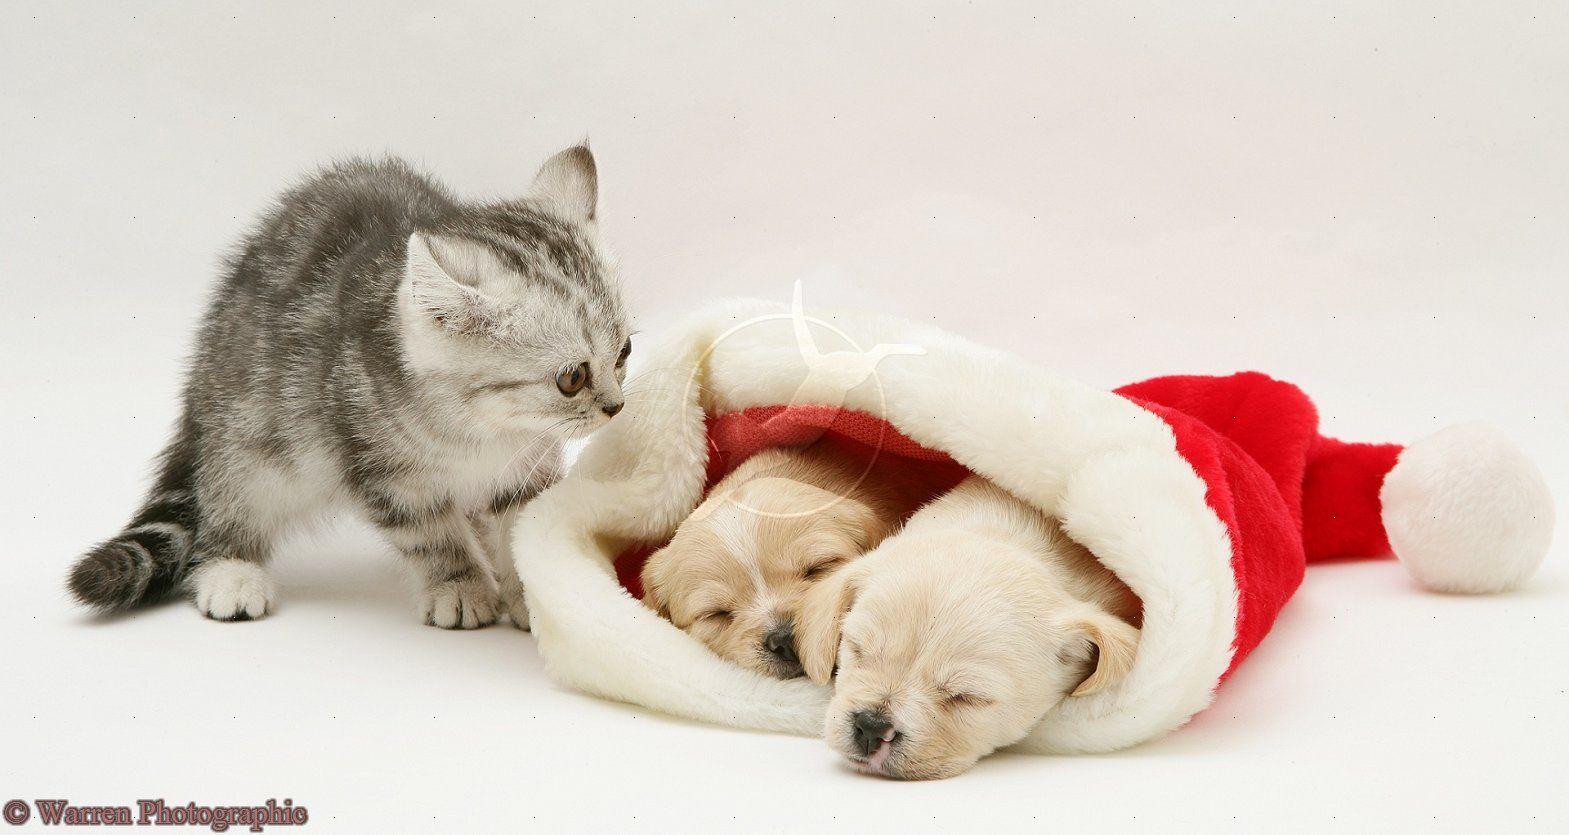 Puppy And Kitten Wallpaper, image collections of wallpaper